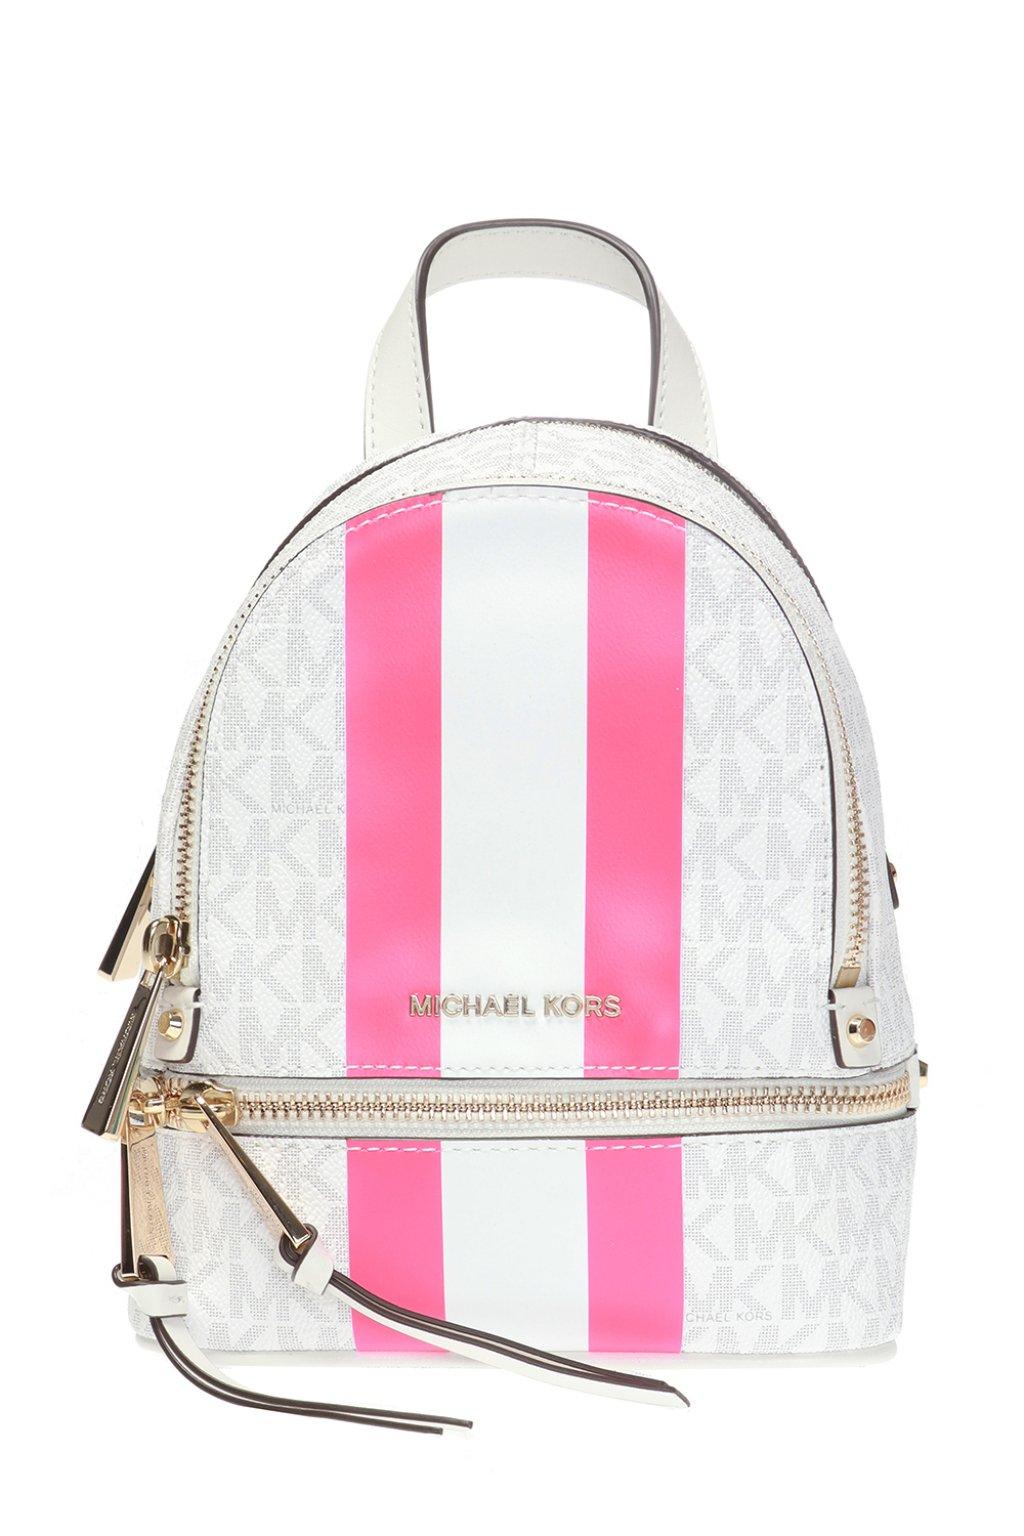 pink and white michael kors backpack